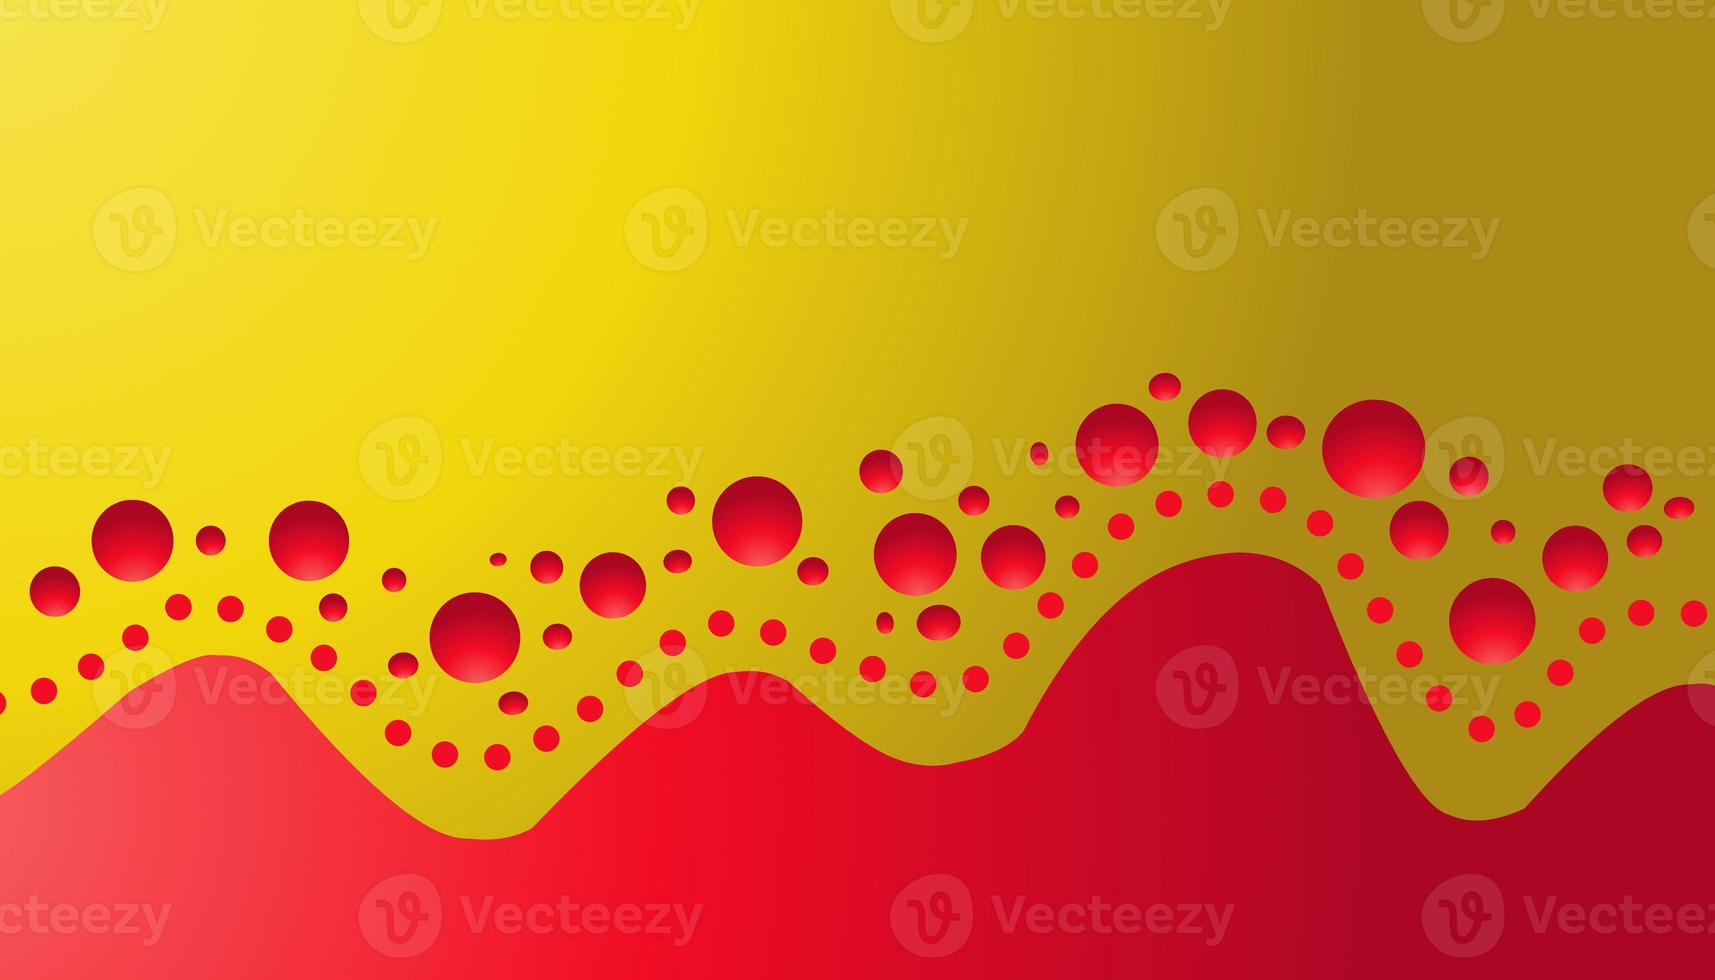 Background illustration gold with red liquid and balls photo